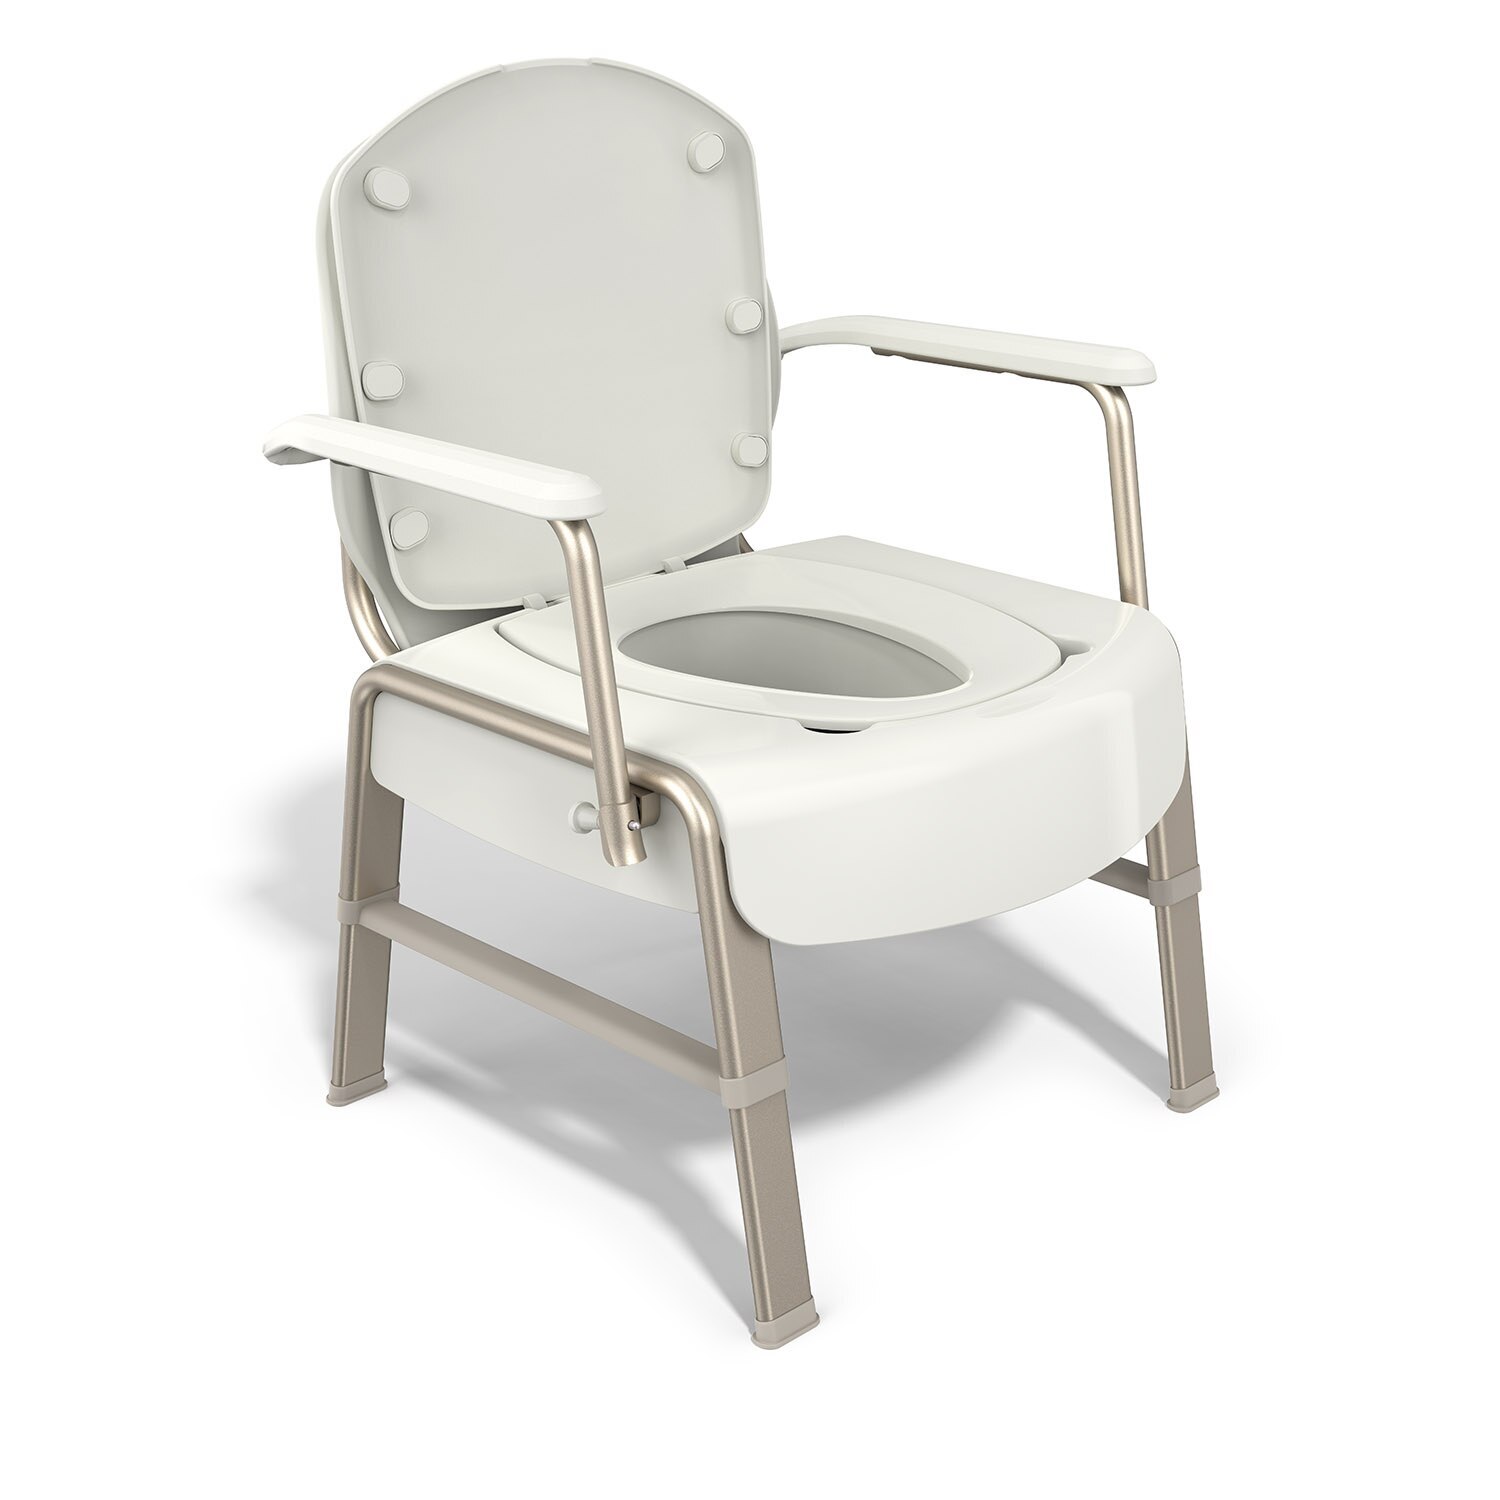 CVS Health 3-in-1 Comfort Commode by Michael Graves Design